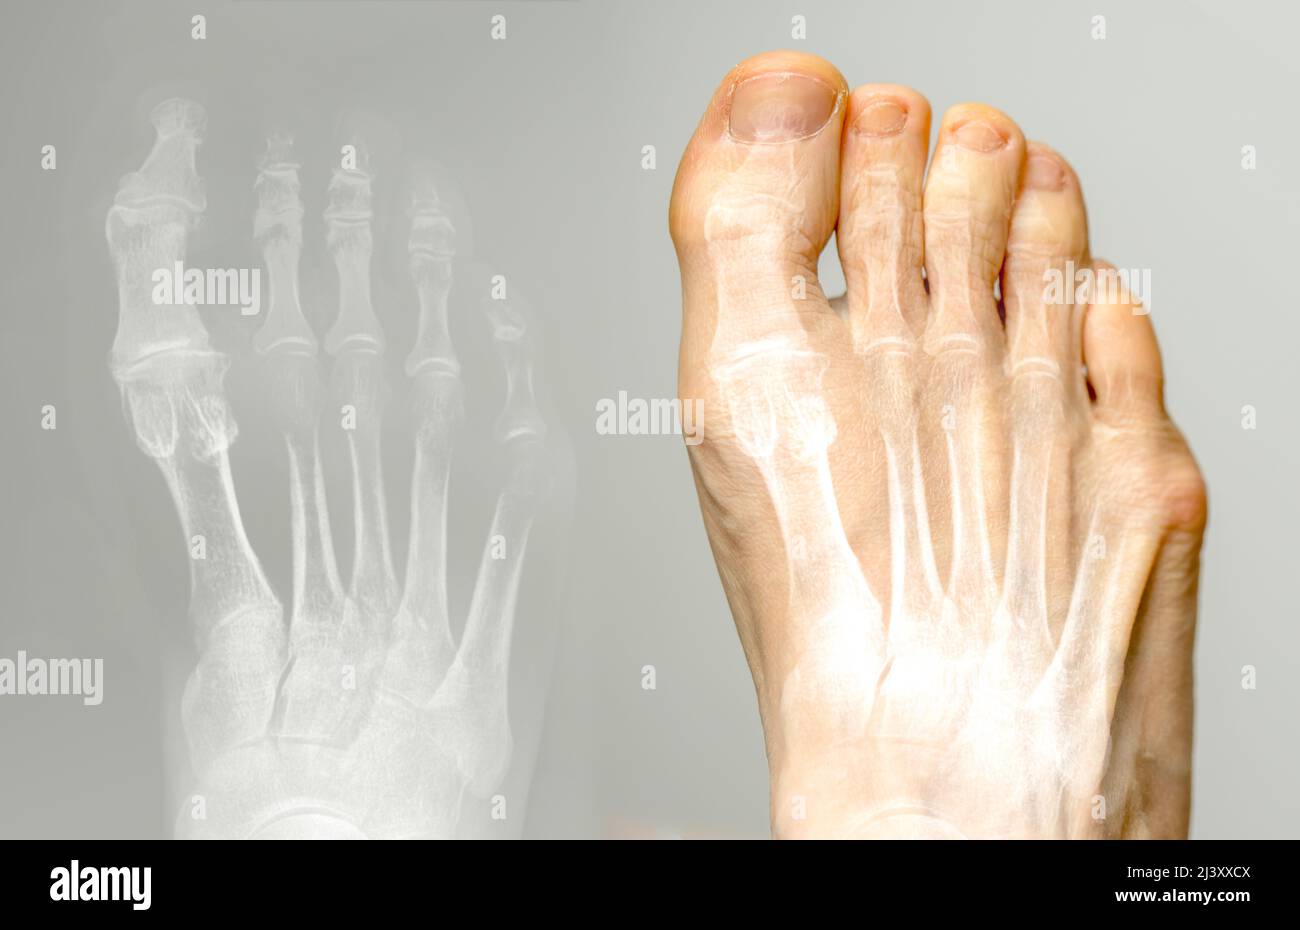 X-ray and the same foot. Hallux varus condition. Stock Photo